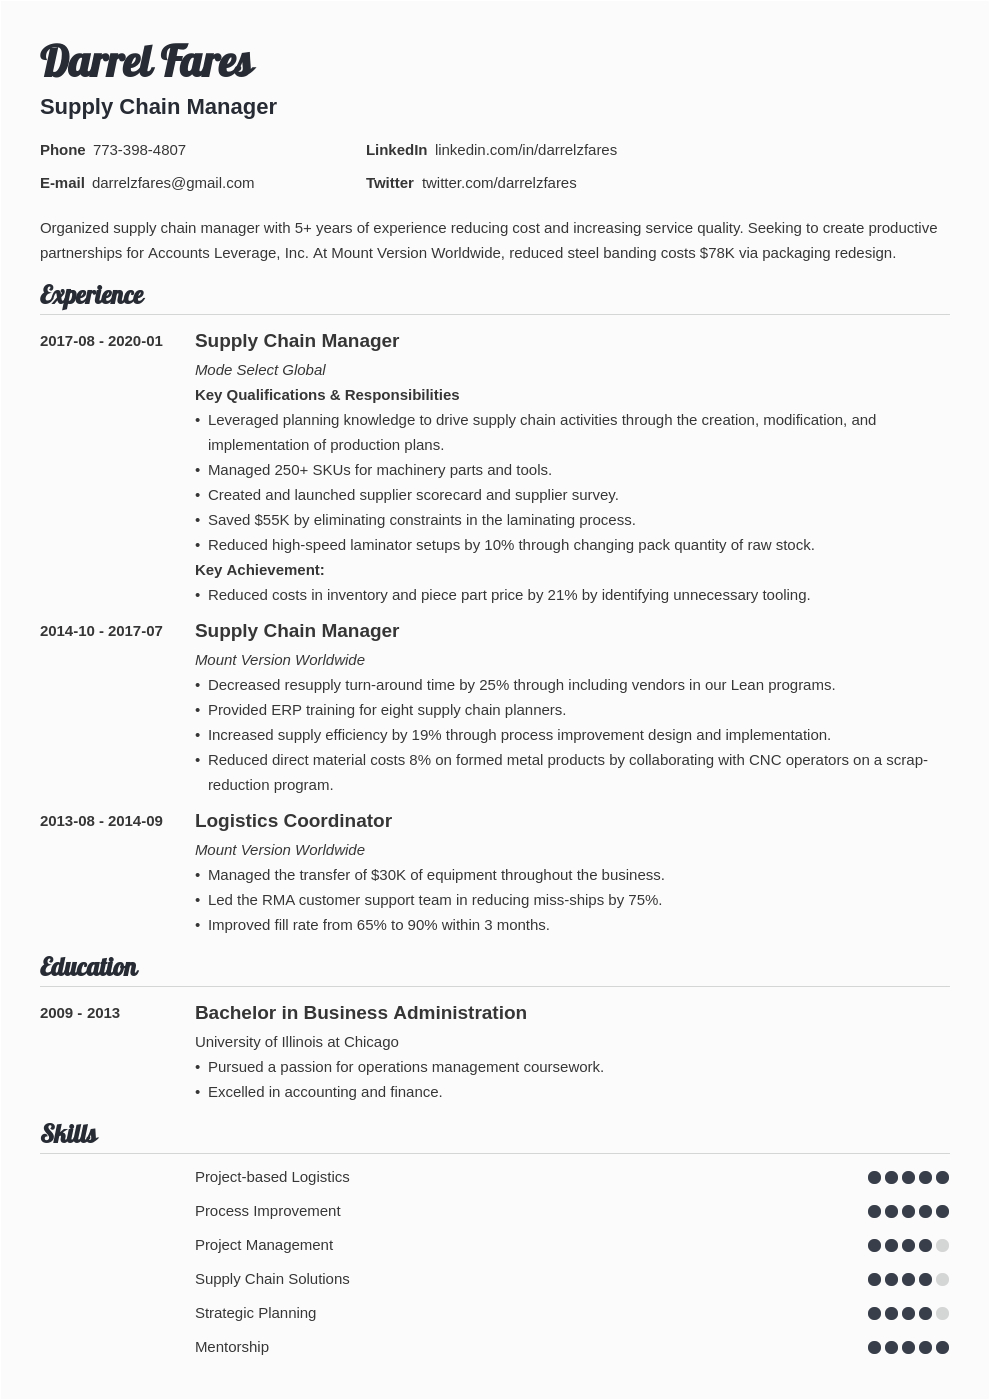 Sample Resume Of Logistics Supply Chain Manager Supply Chain Manager Resume Examples and Writing Guide